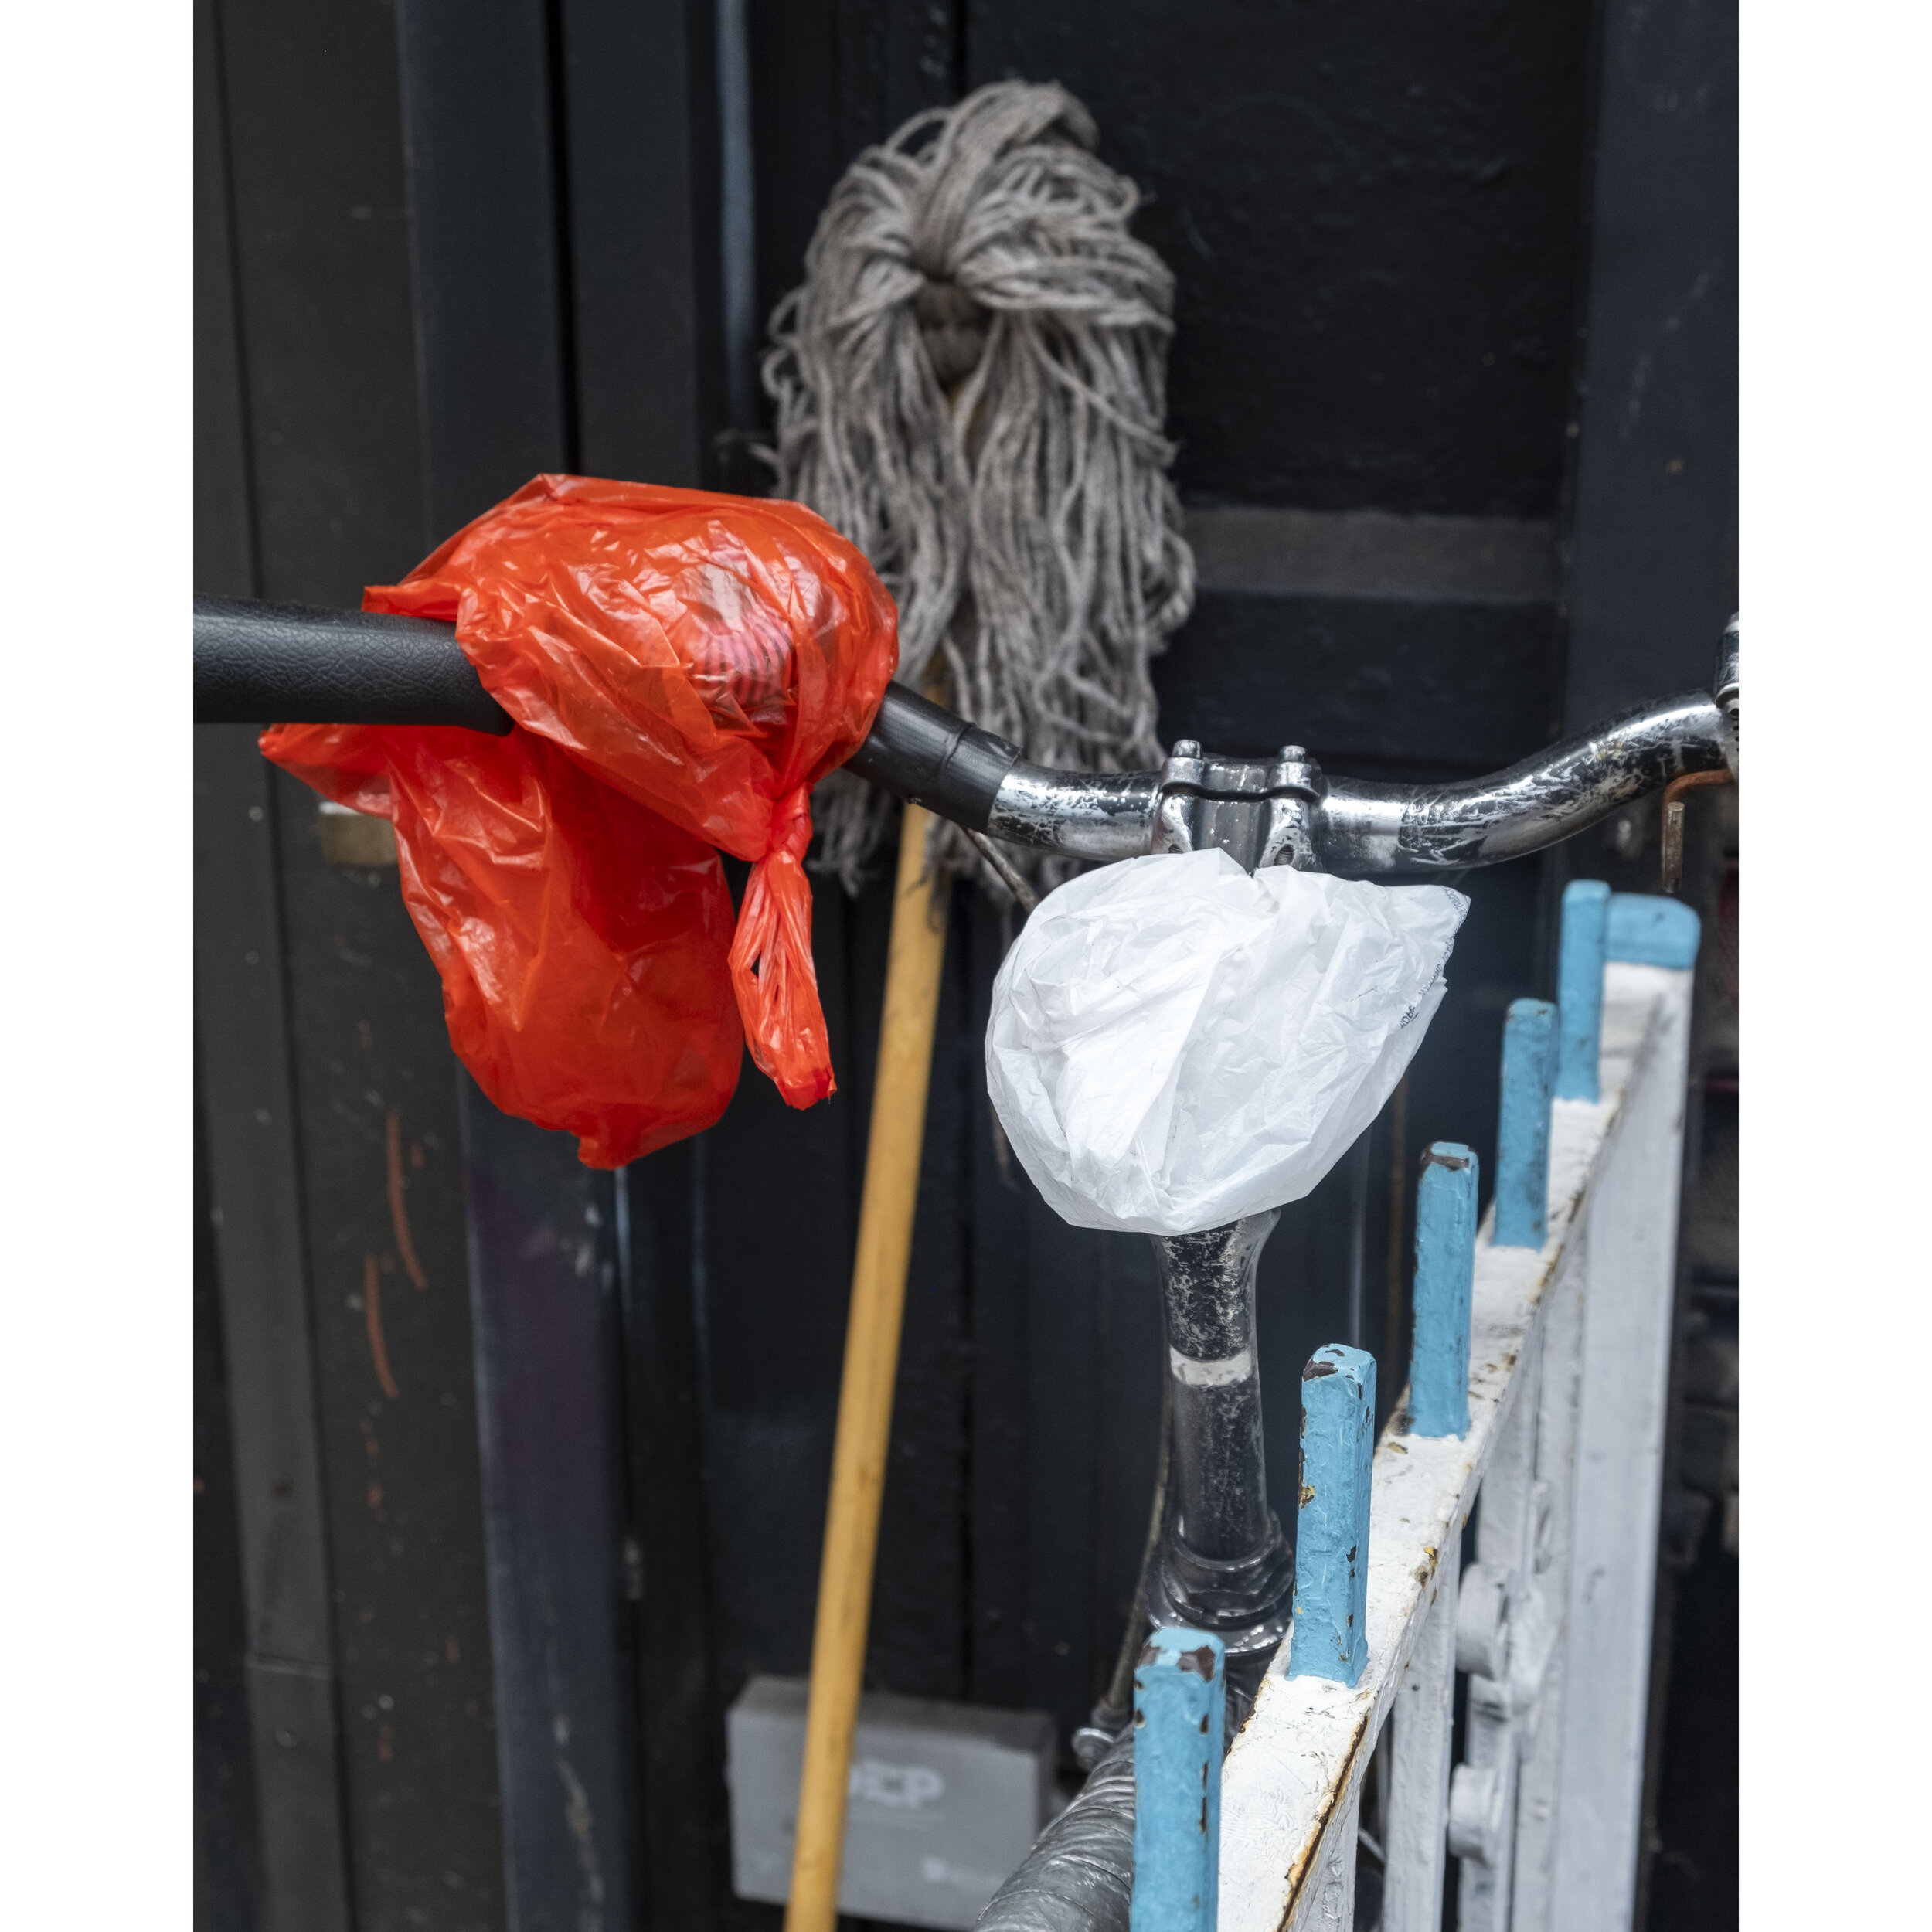 mop and 2 bags.jpg